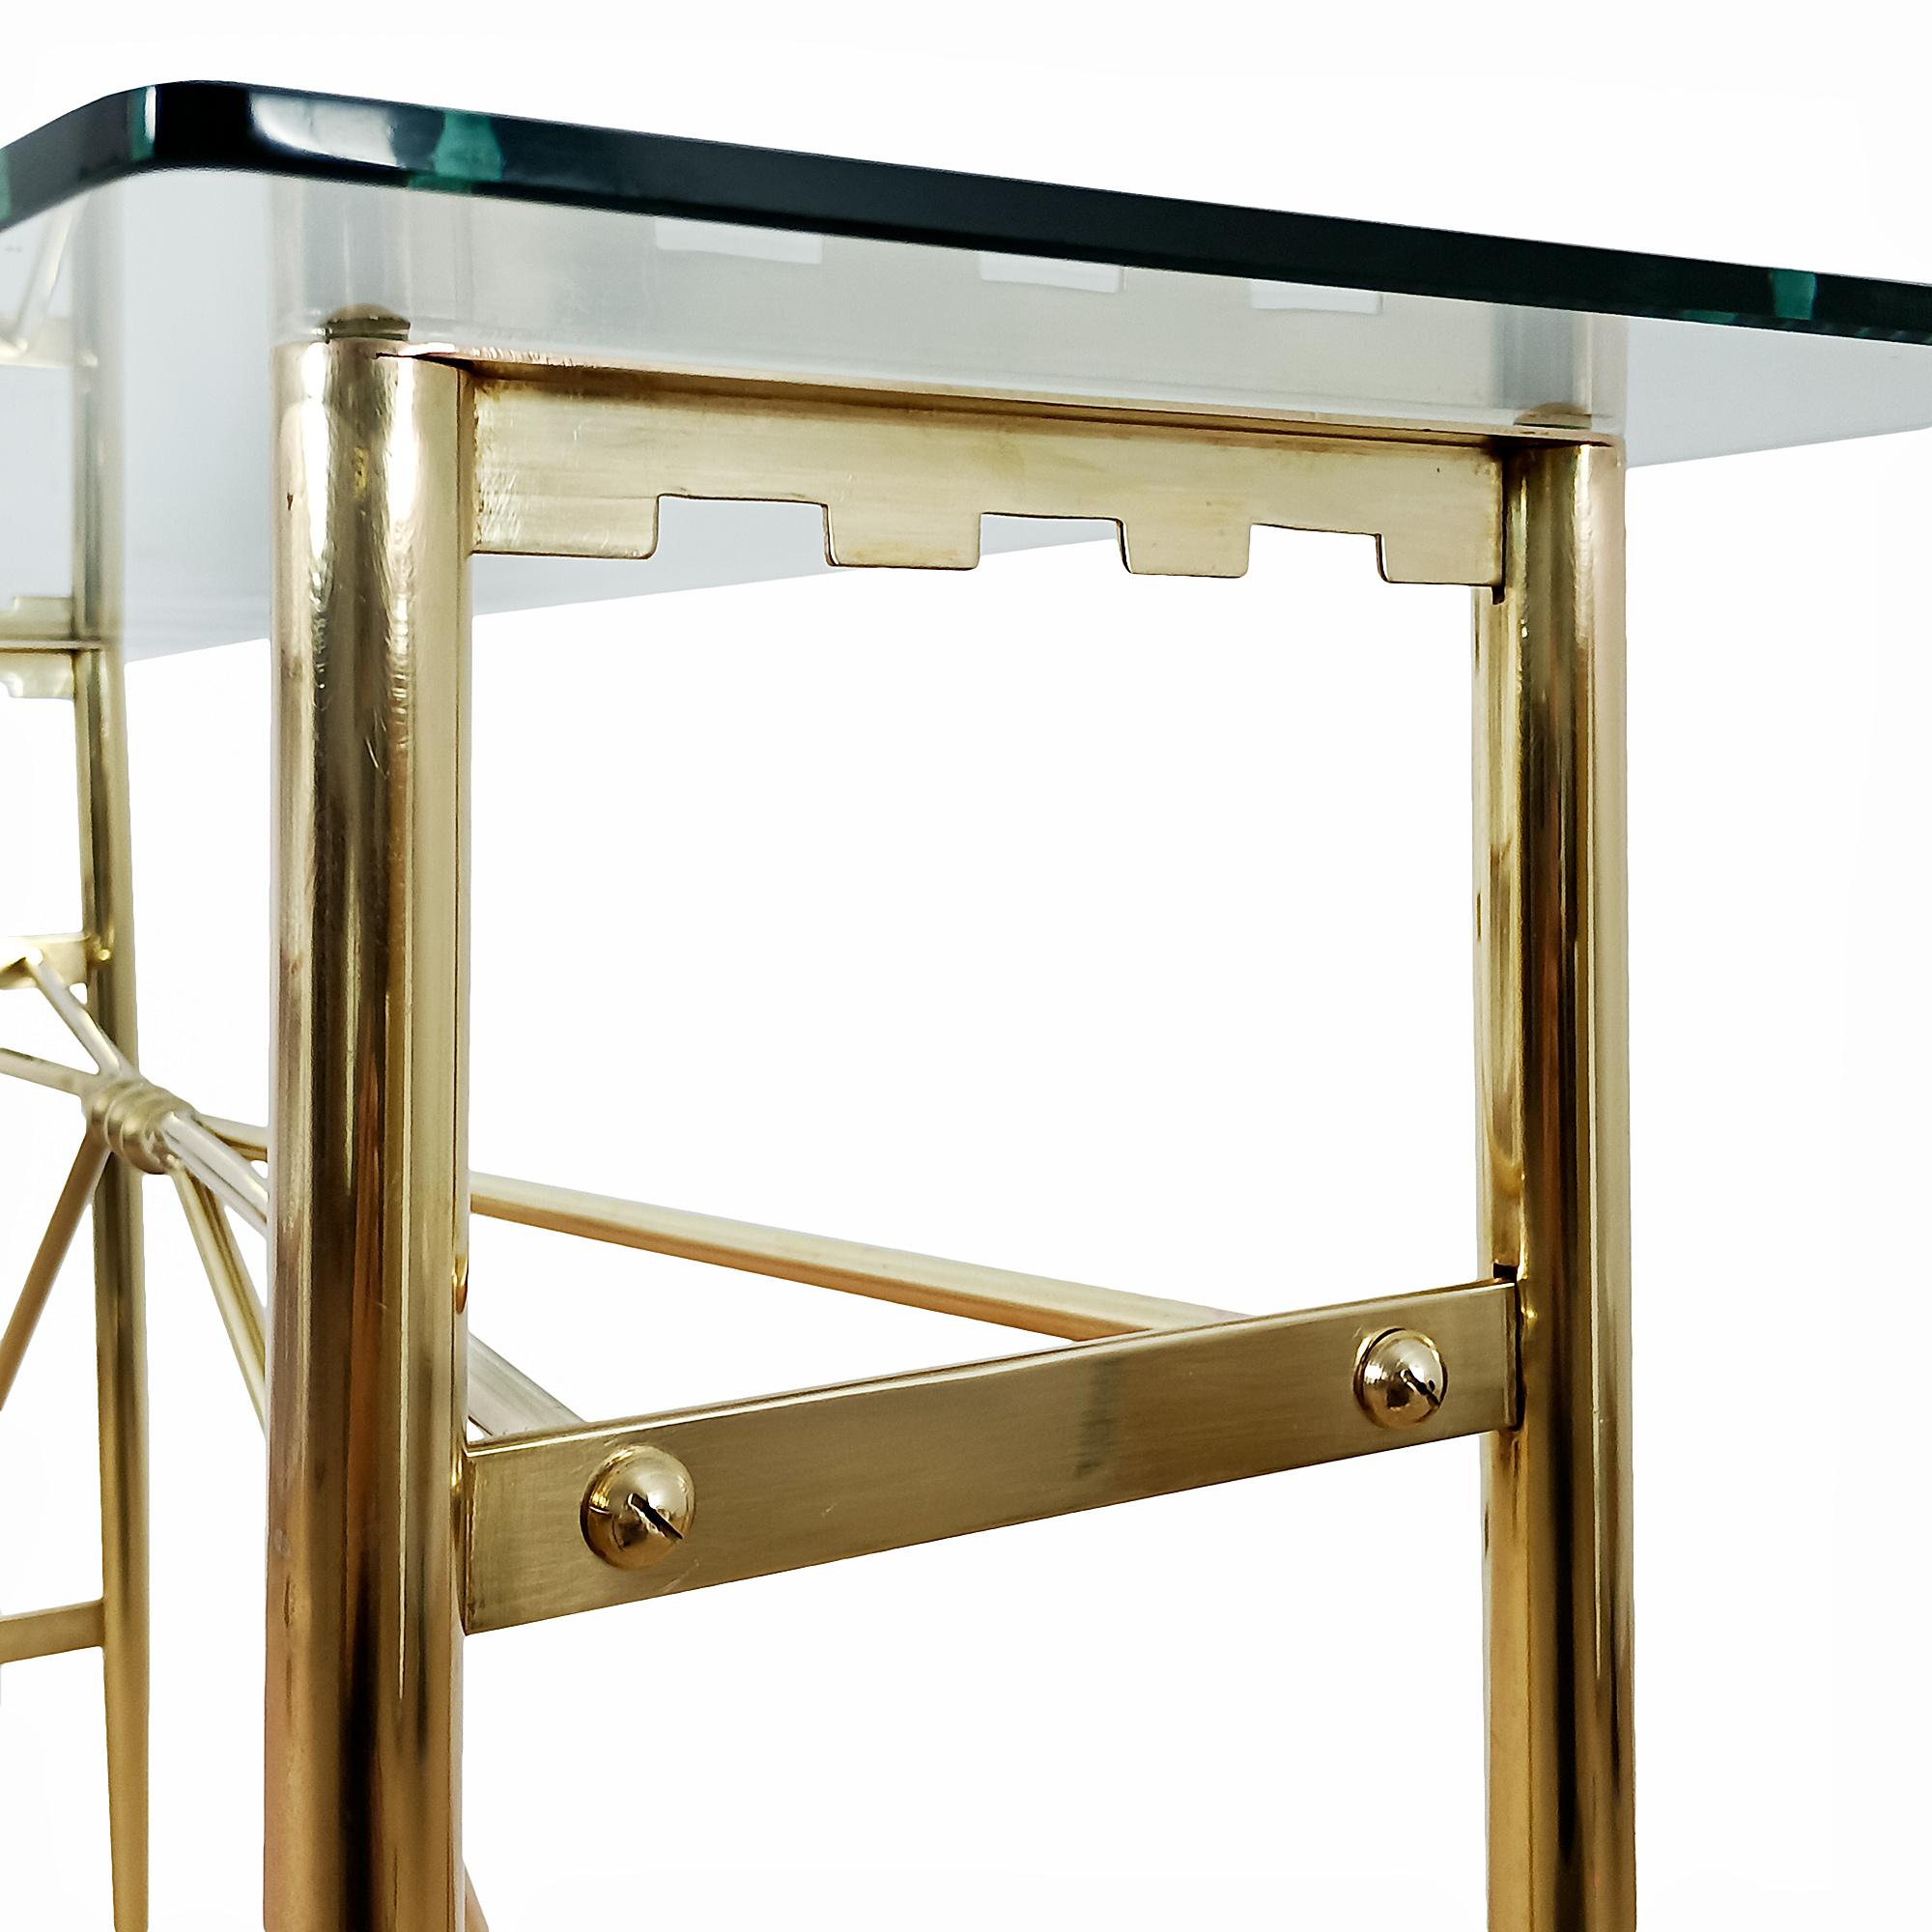 20th Century Mid-Century Modern Console Table in Solid Brass and a Glass Shelf, Italy For Sale